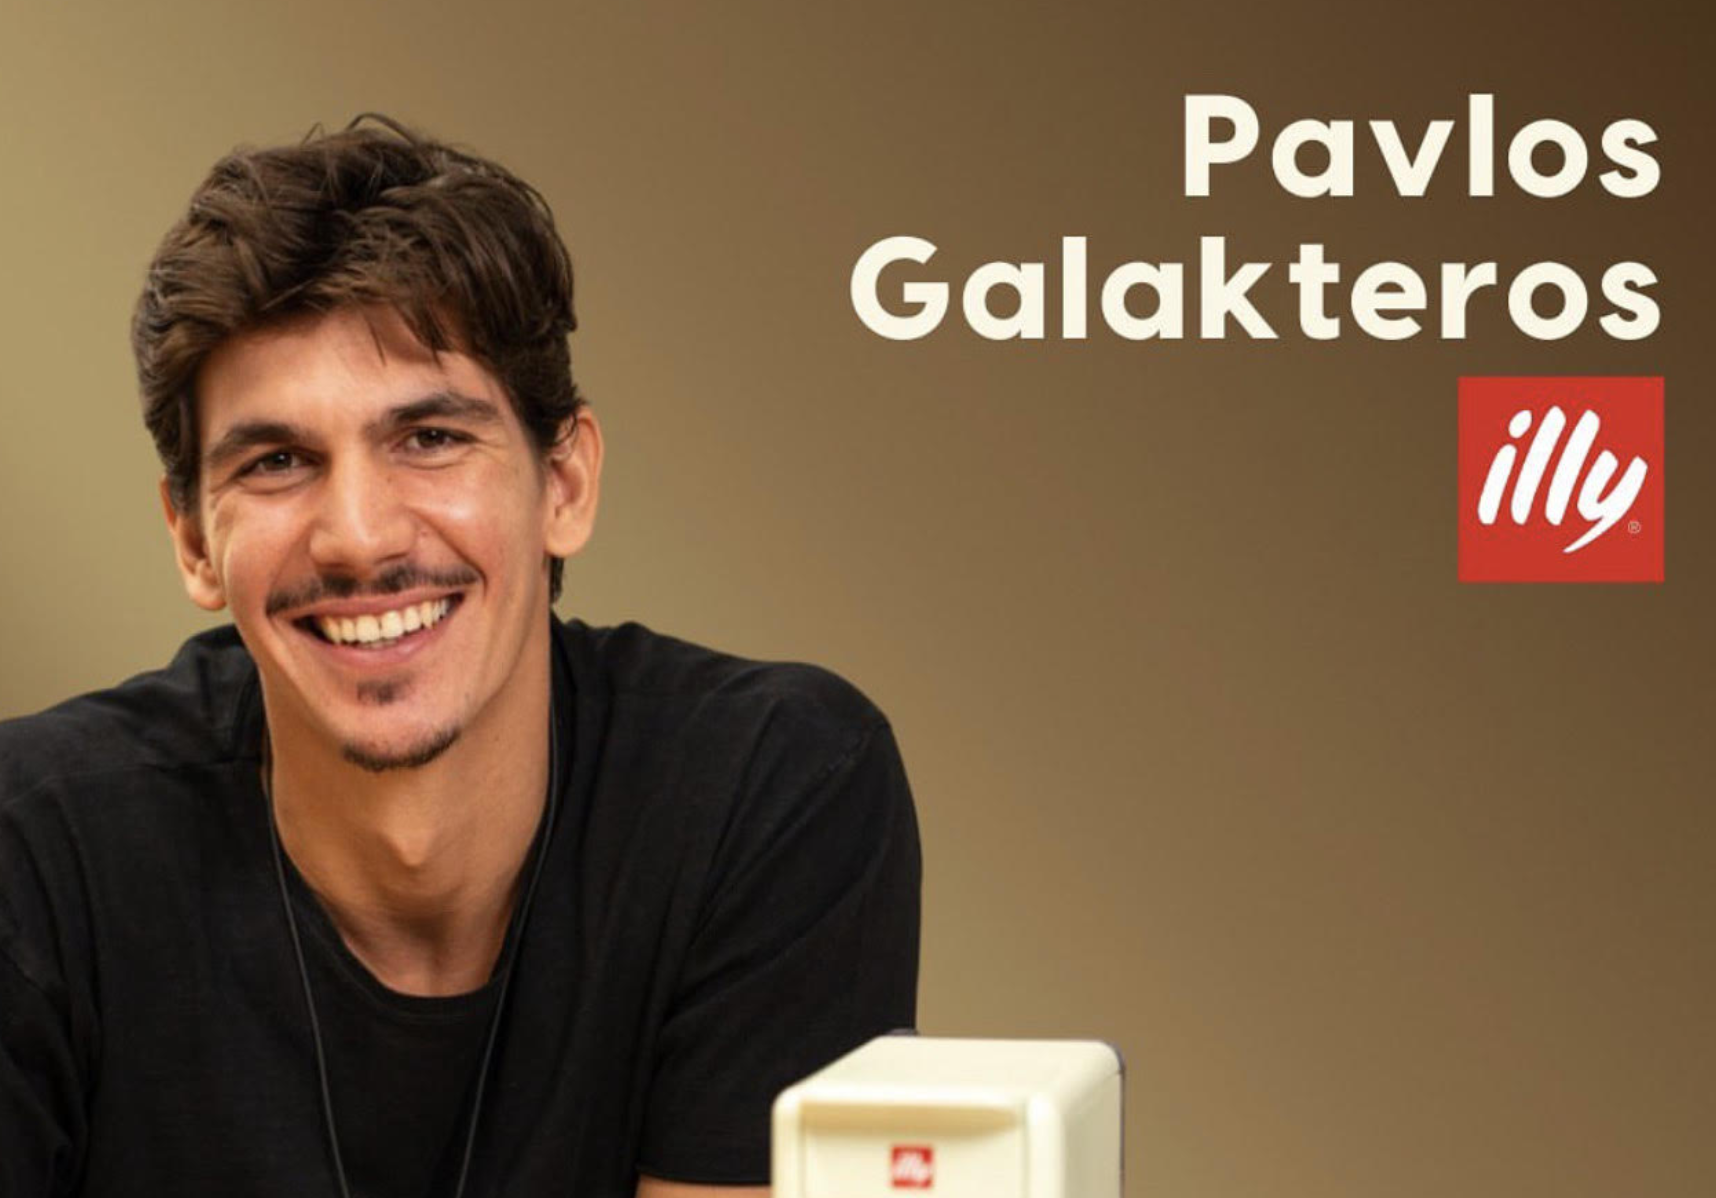 Pavlos Galakteros and Illy Greece: Make a Double Freddo Espresso at Home